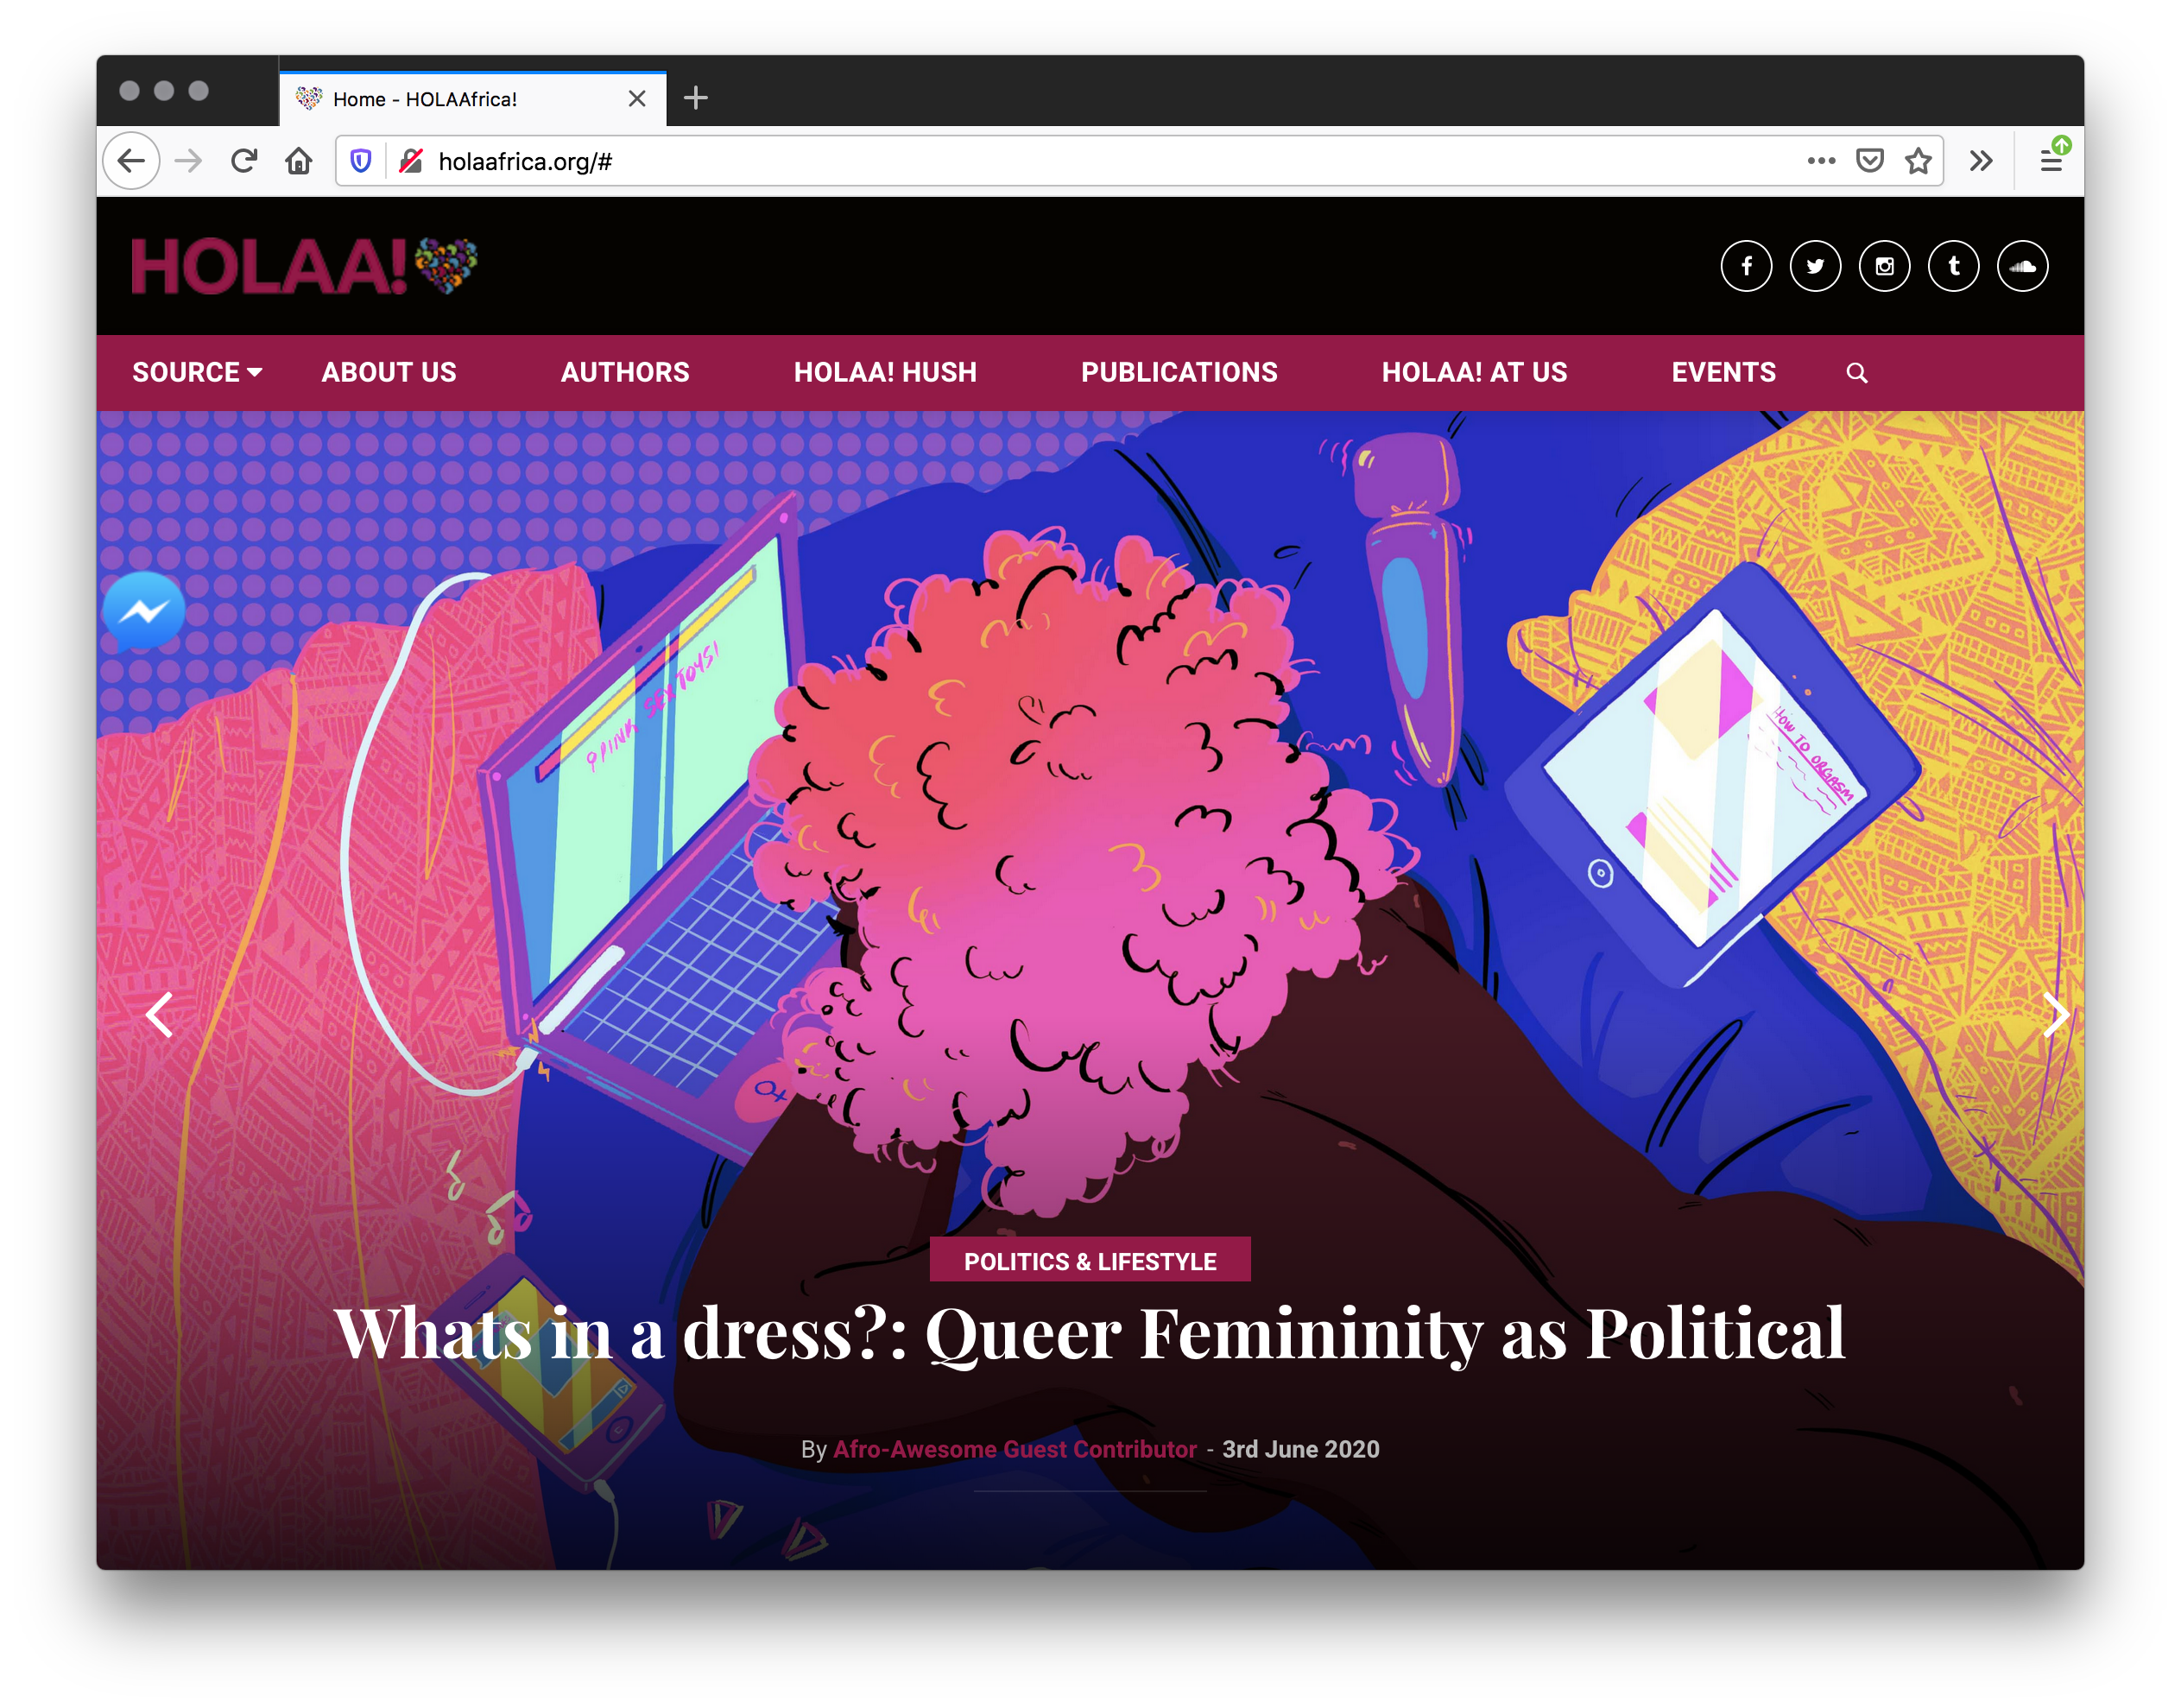 Screenshot of a webpage showing a bright and colorful illustrated cover to a politics and lifestyle article. A woman with pink curly hair uses her laptop while lying naked on her bed. A purple vibrator, phone playing music, and tablet lay beside her.